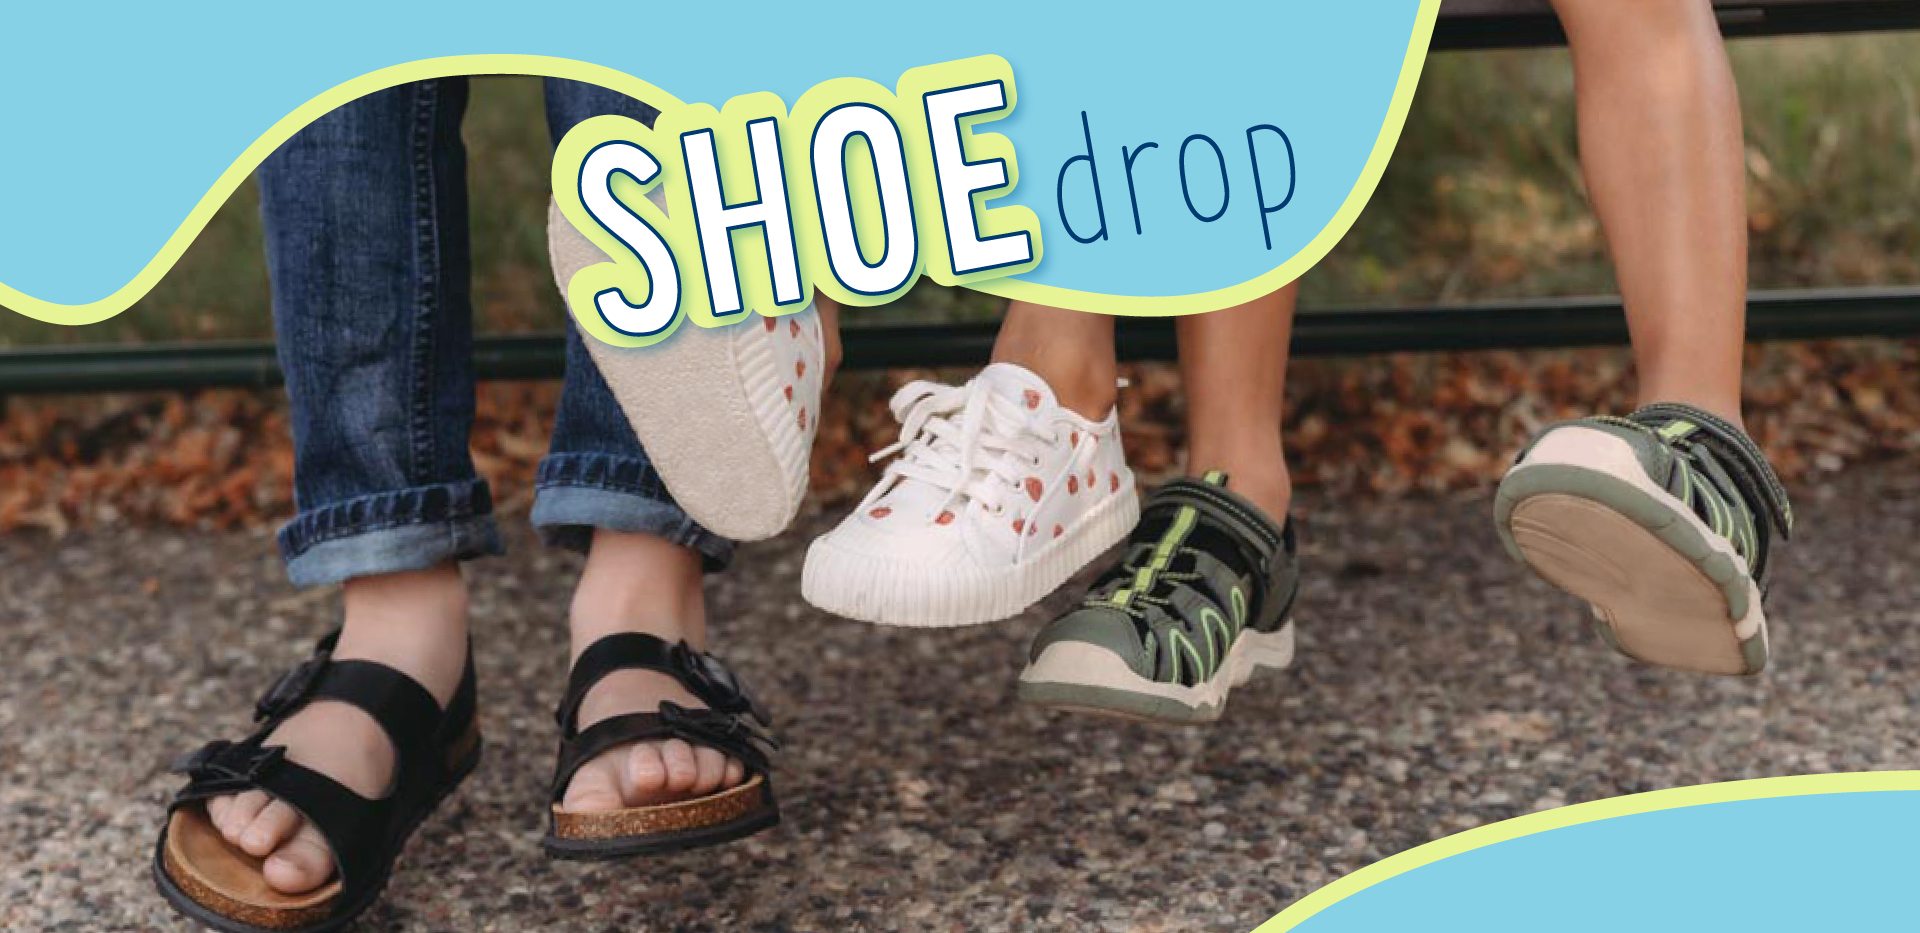 We're dropping a huge selection of shoes all priced up to 70% less than retail!